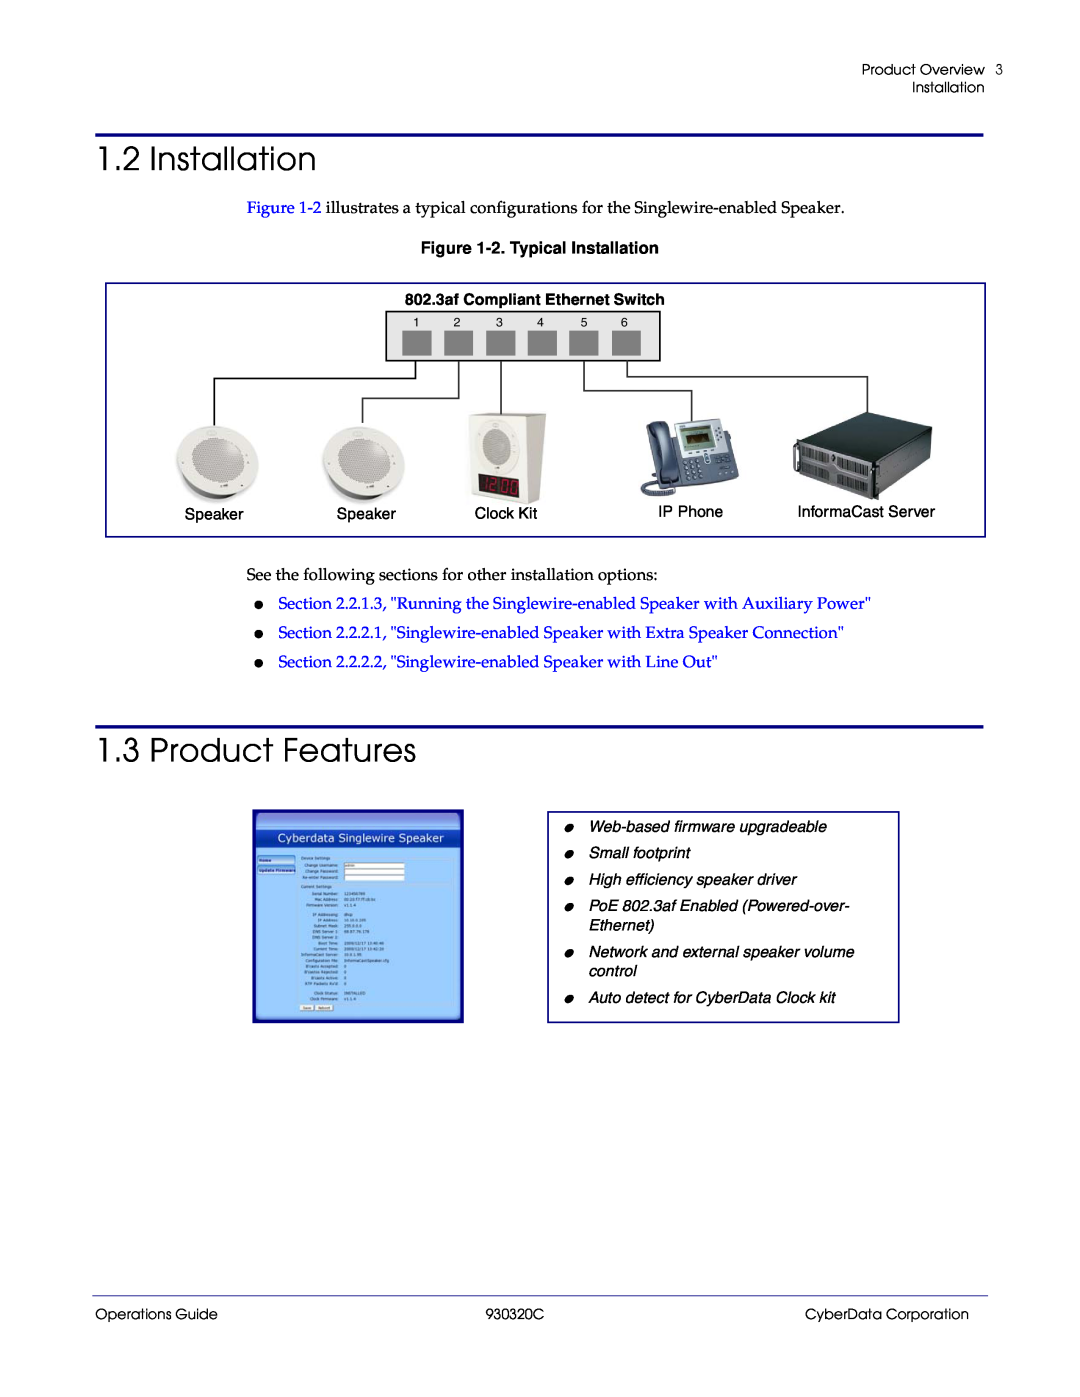 CyberData 11103 manual 1.3Product Features, 2.Typical Installation, 802.3af Compliant Ethernet Switch 